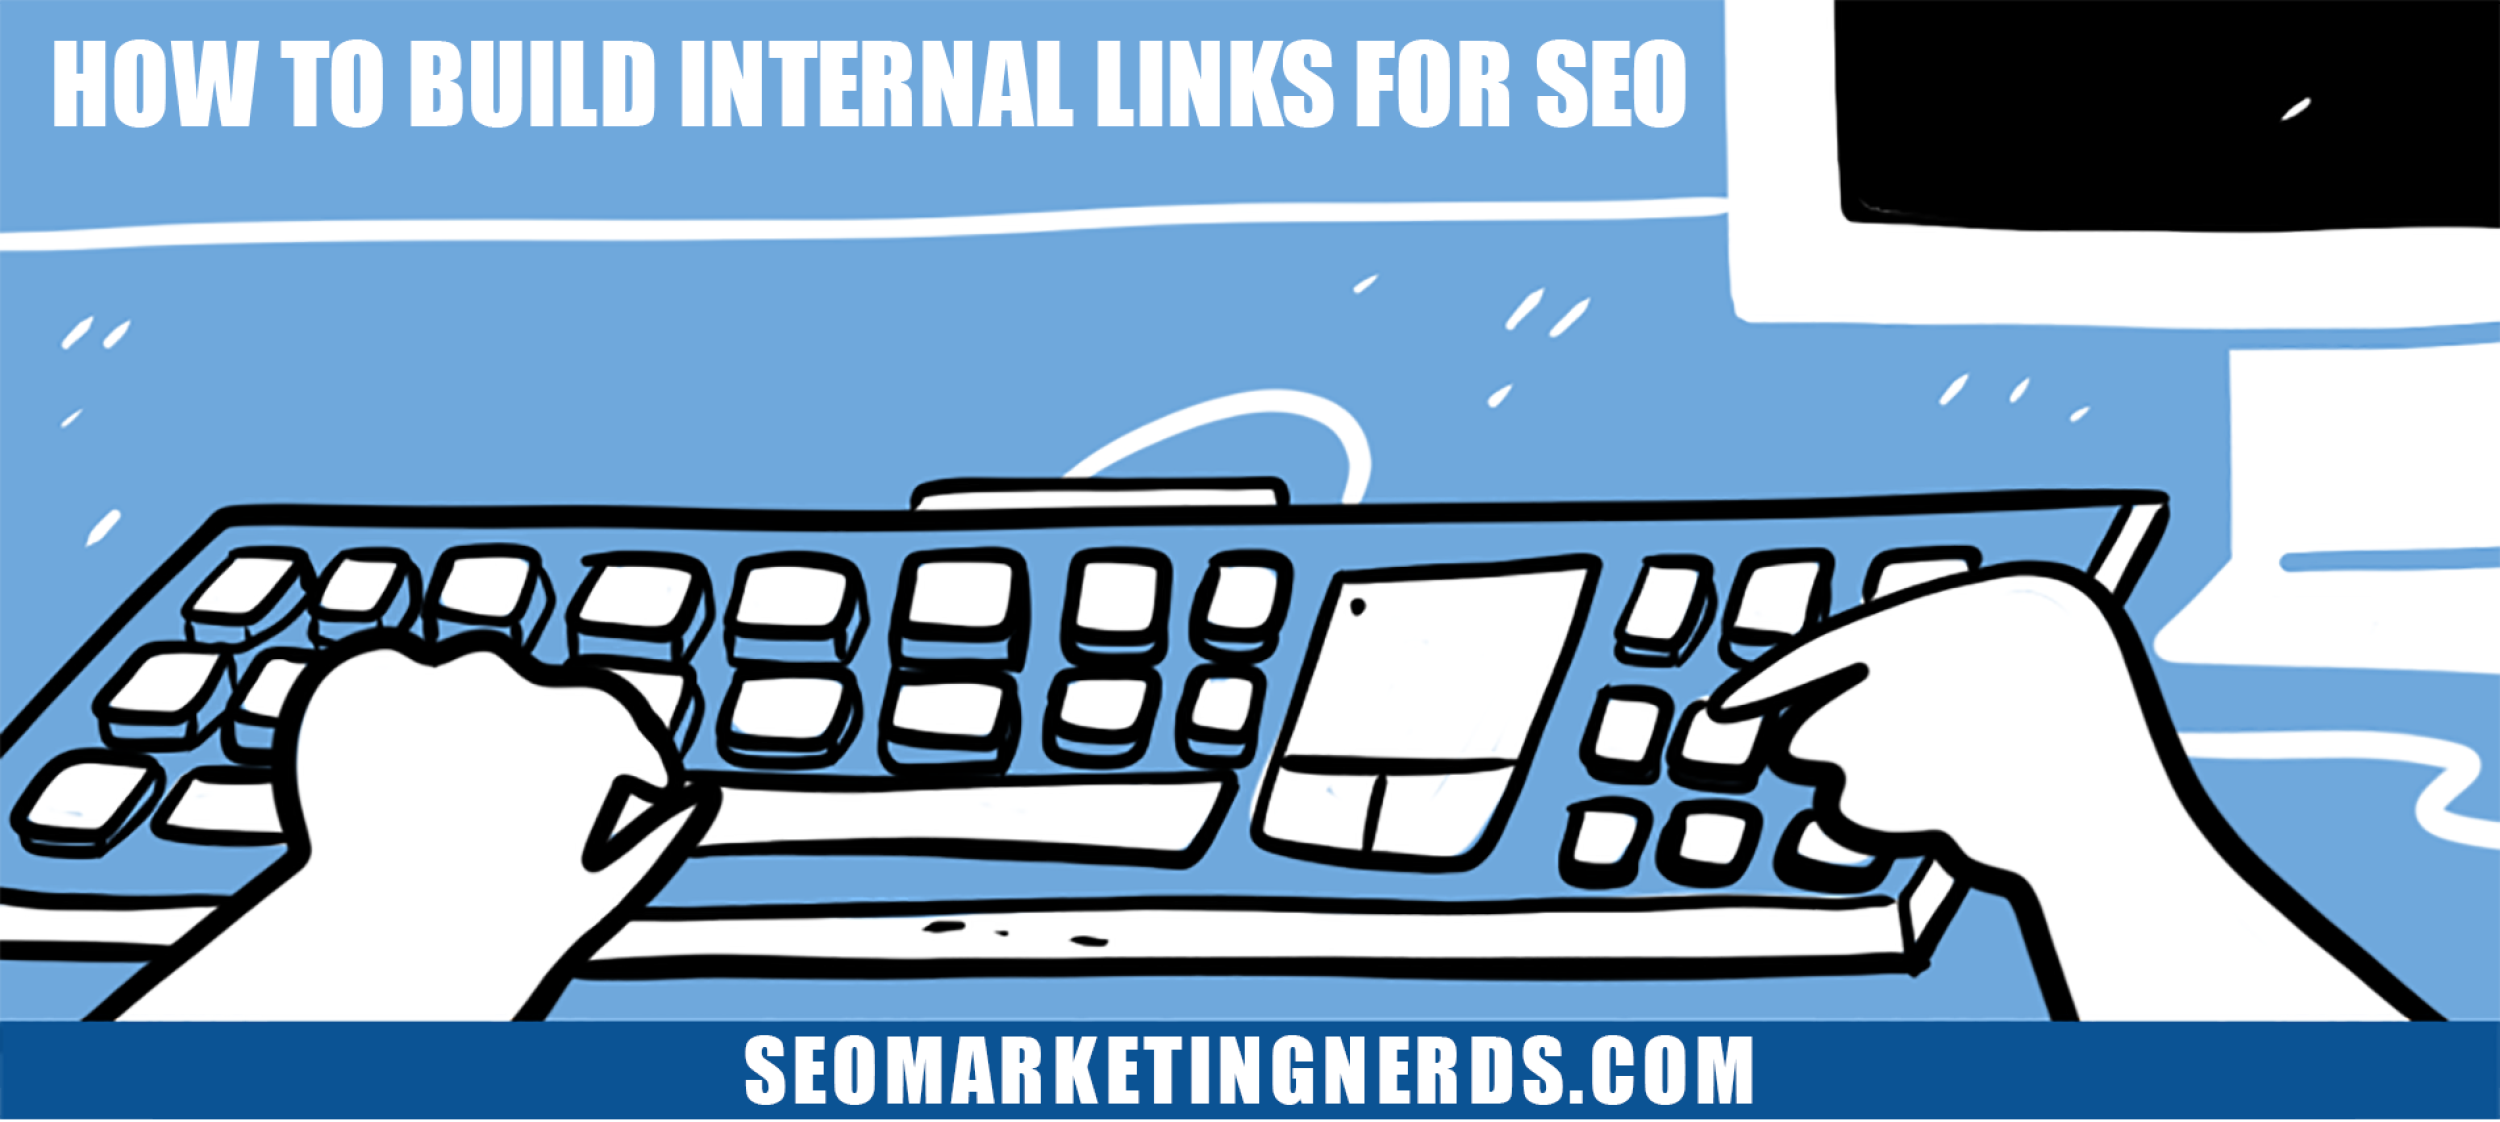 How to Build Internal Links for SEO